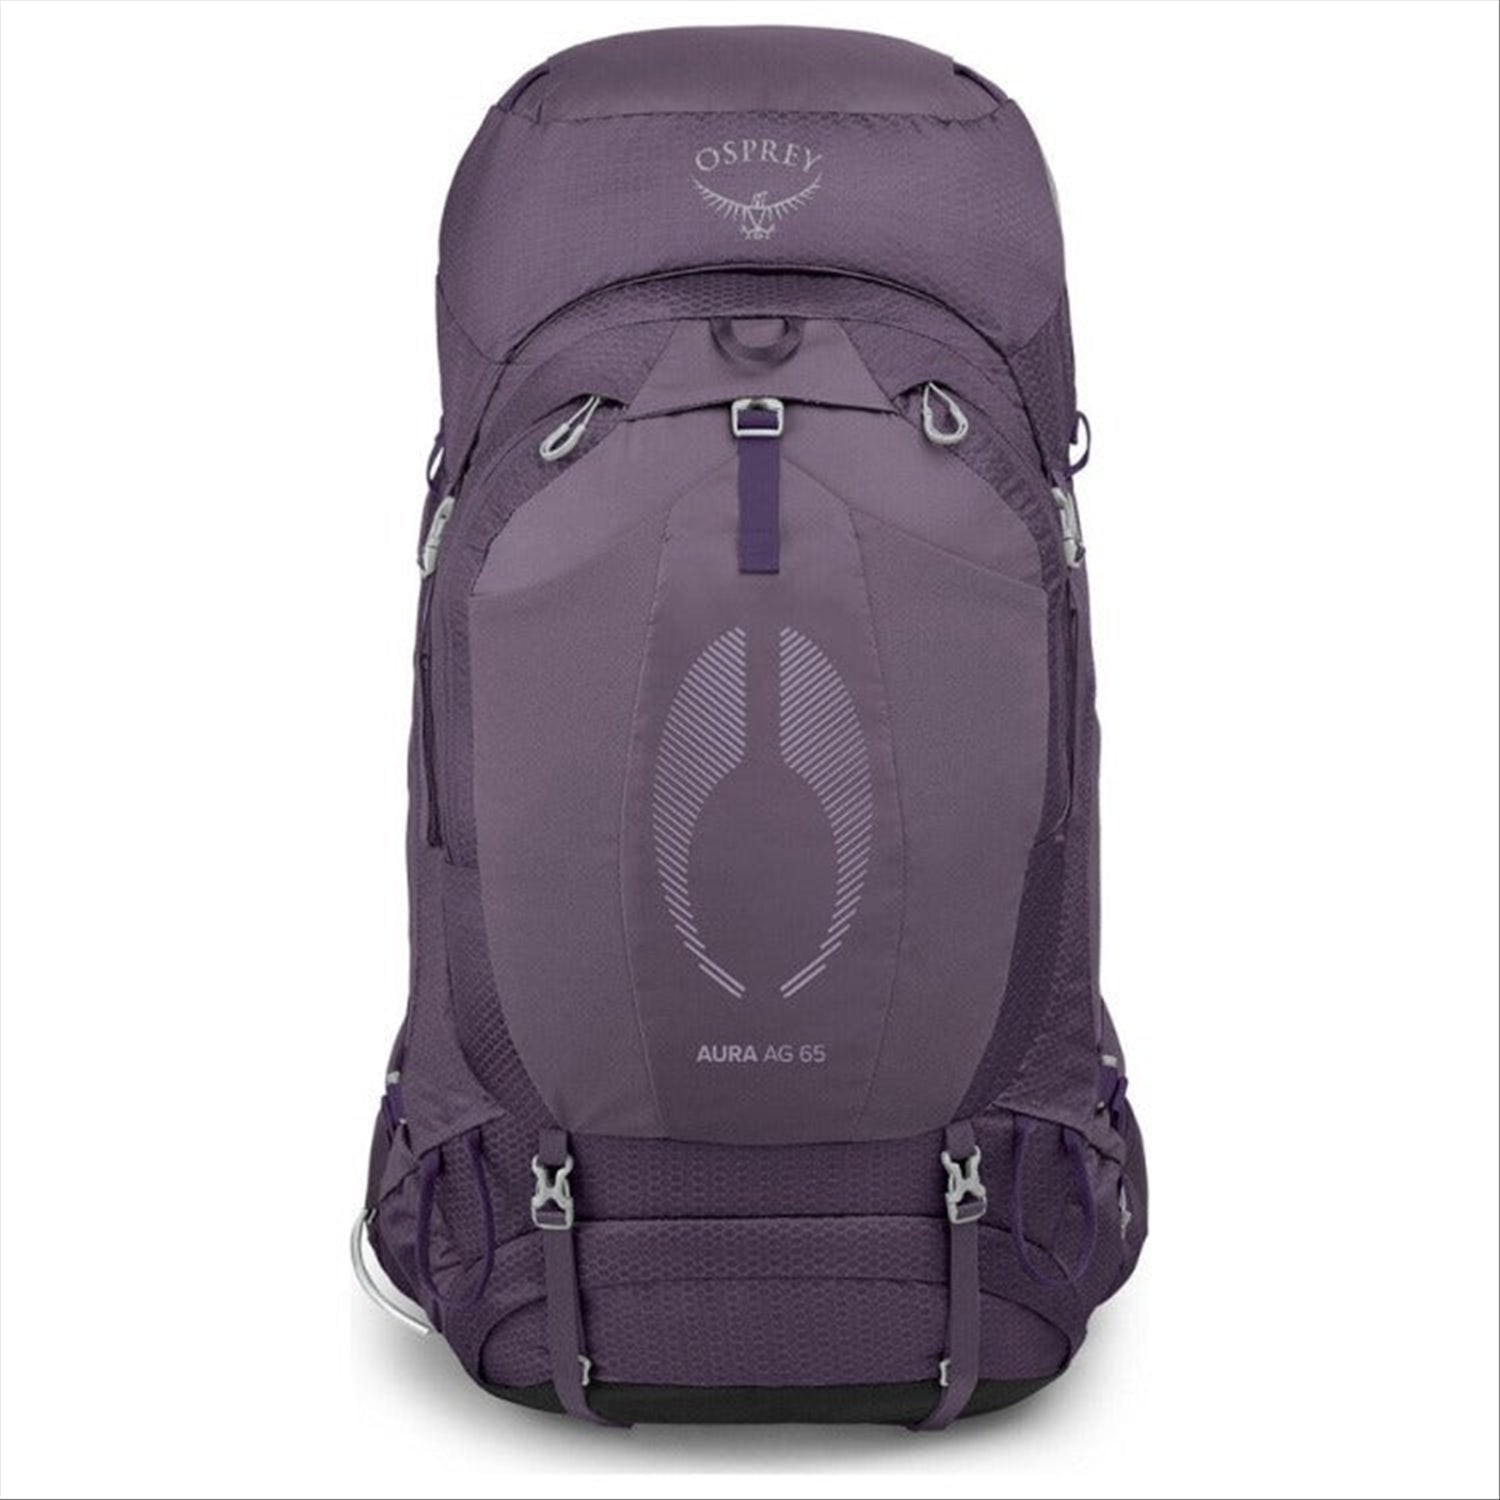 Osprey Aura 65 Women's Backpack - Hiking Backpacks from Intents Outdoors